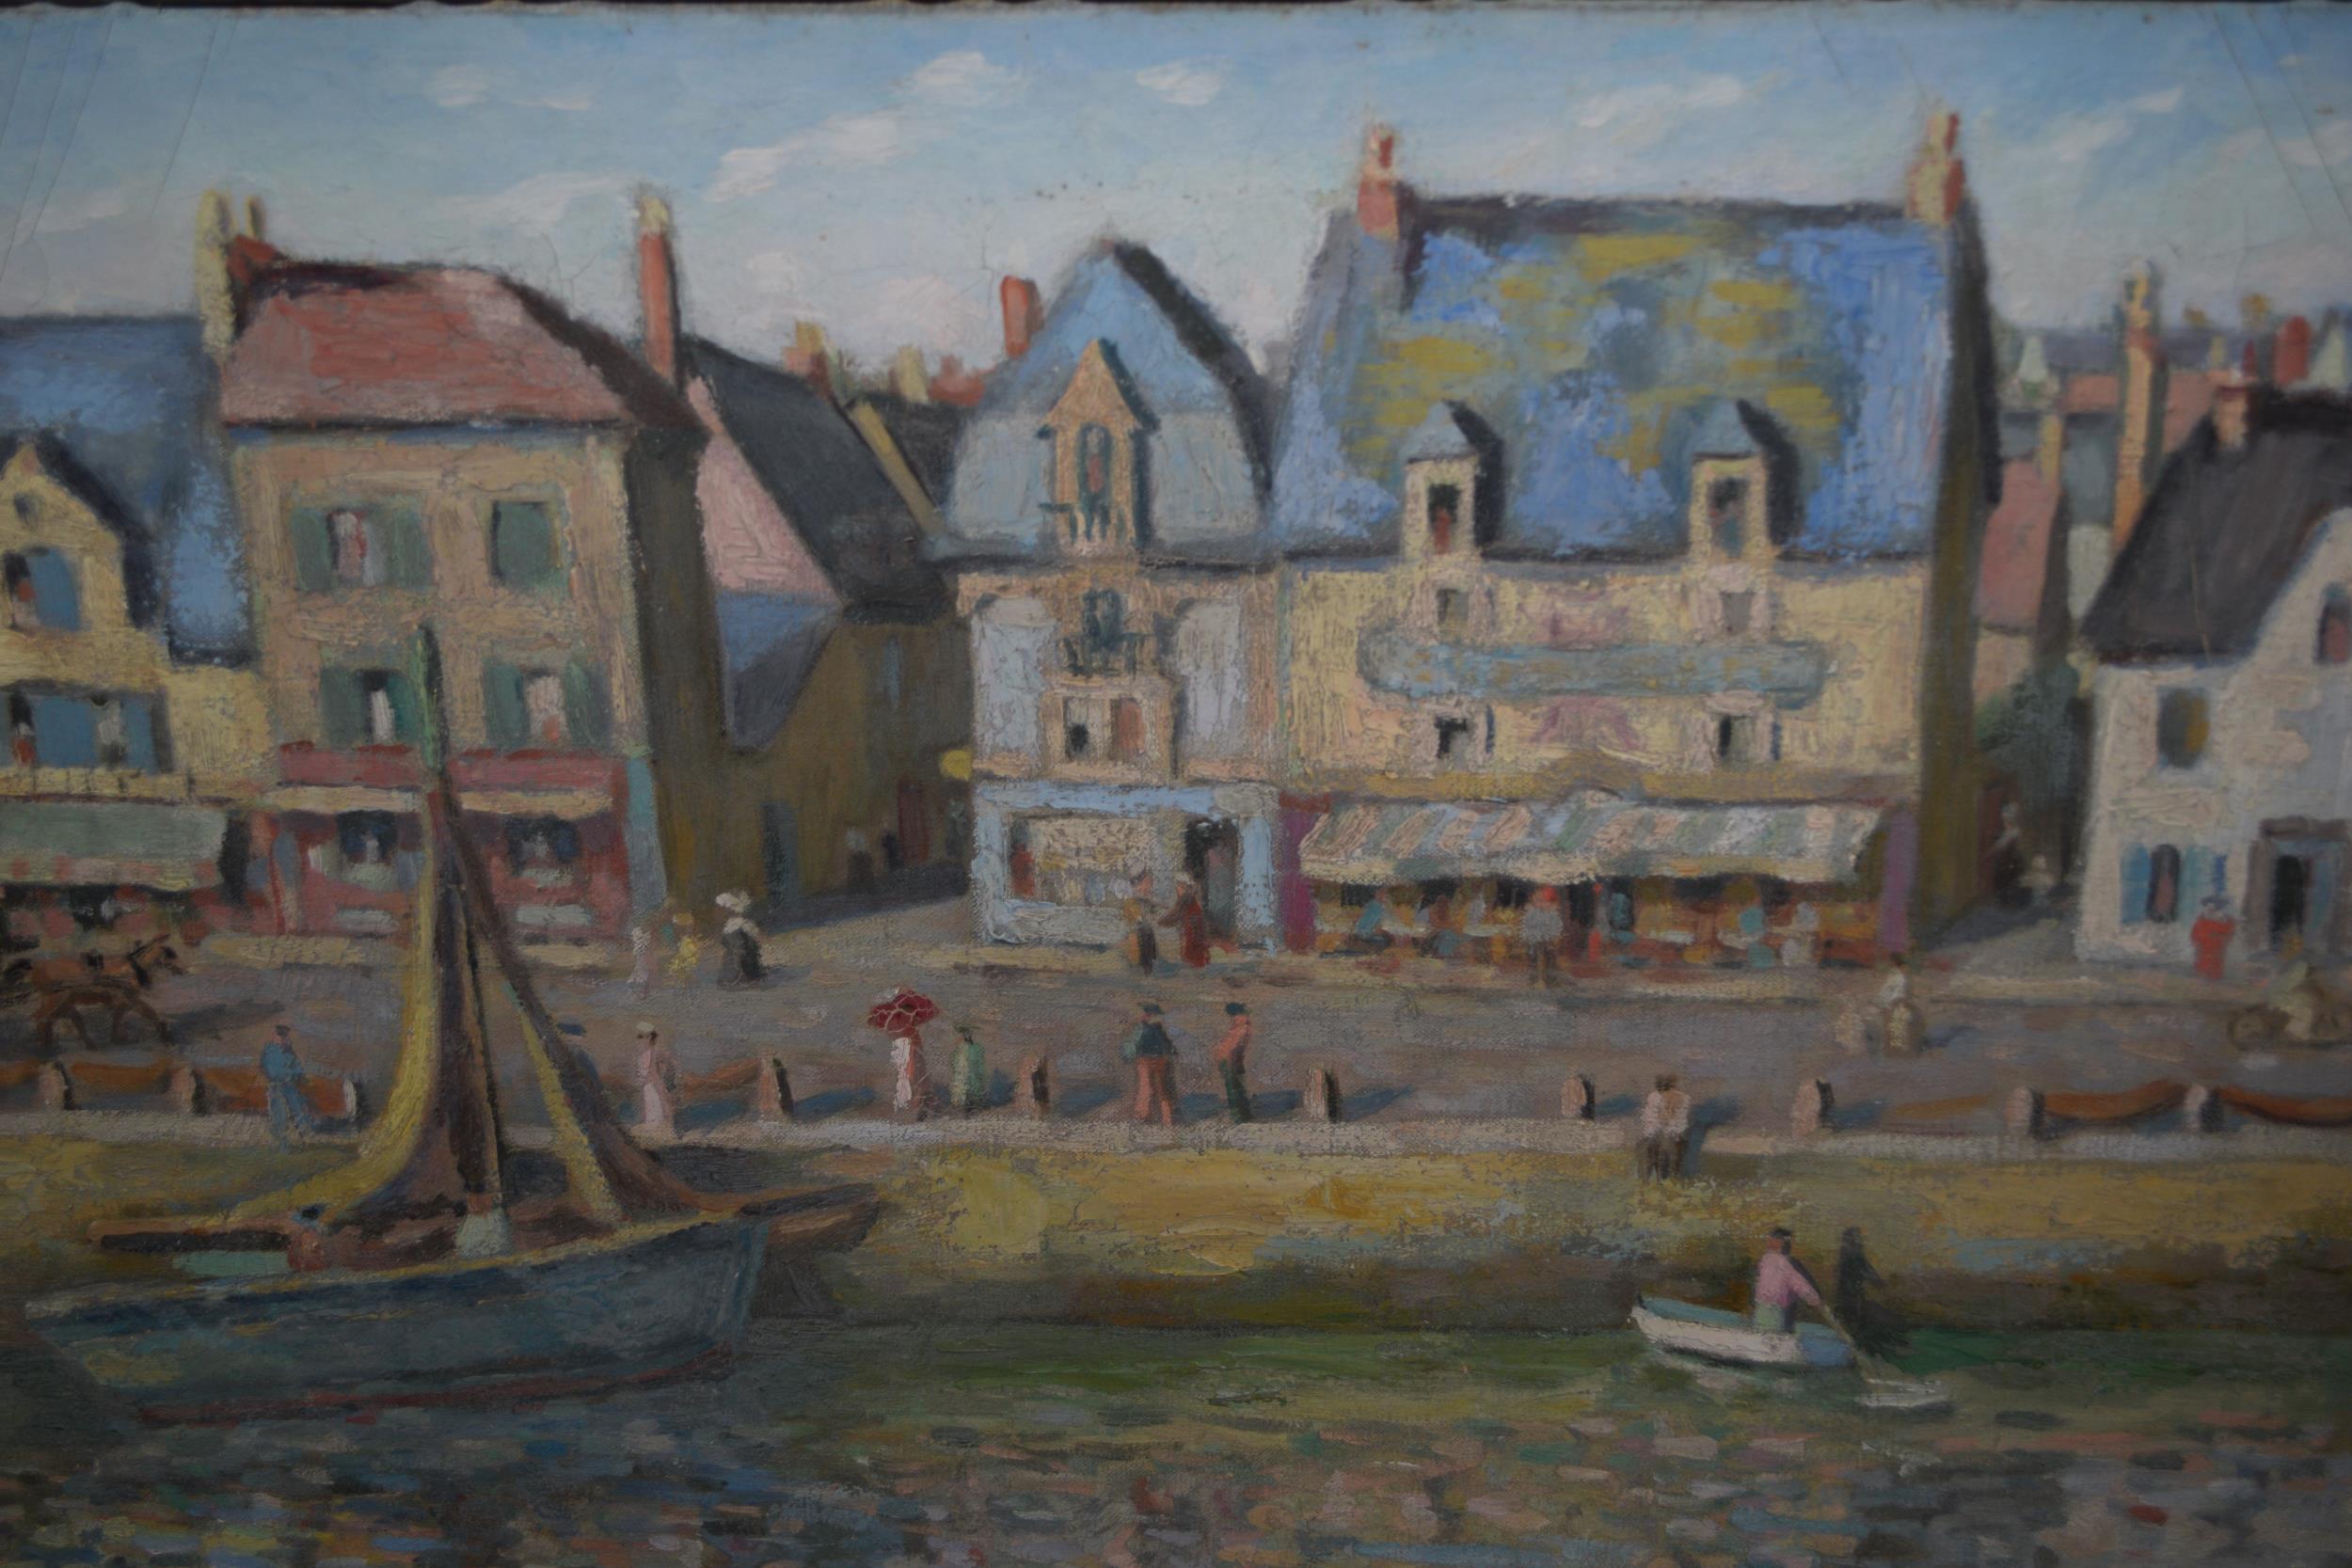 Impressionist style oil on canvas, boats, figures and buildings by a quayside, signed F.S. Bolam and